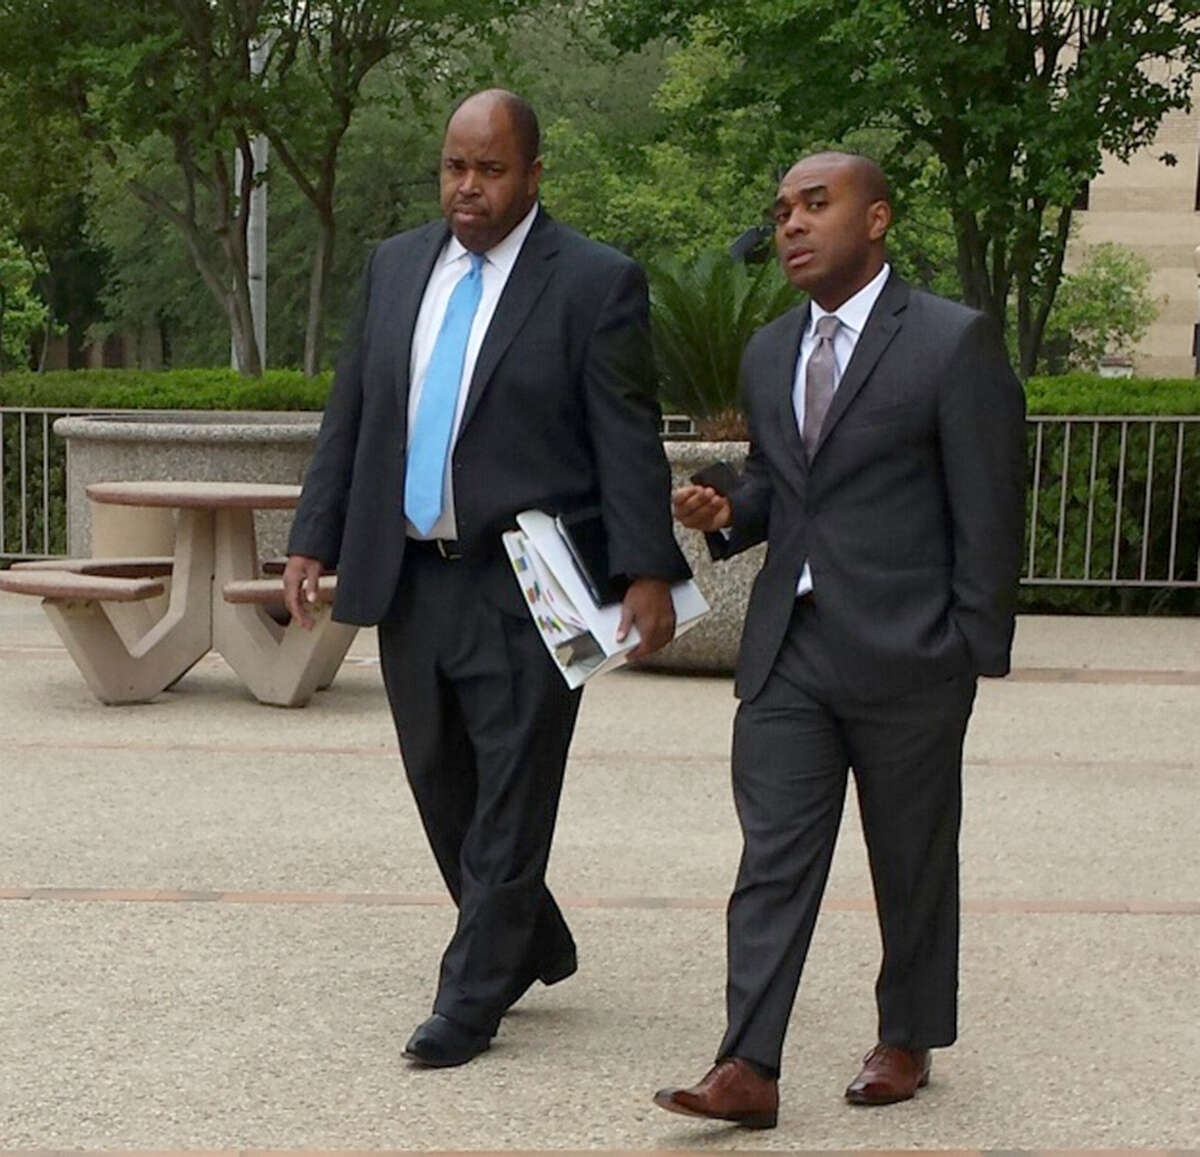 Leonard Roundtree III, right, leaves San Antonio's federal court with his lawyer, Curtis Lilly. Roundtree is on trial on charges that he agreed to help deliver a payment to a hitman his uncle, Alvin Roundtree, allegedly hired to kill his estranged common-law wife. Last June, Alvin Roundtree shot the woman seven times at Joint Base San AntonioÂÃÃ¶Fort Sam Houston, but she survived.